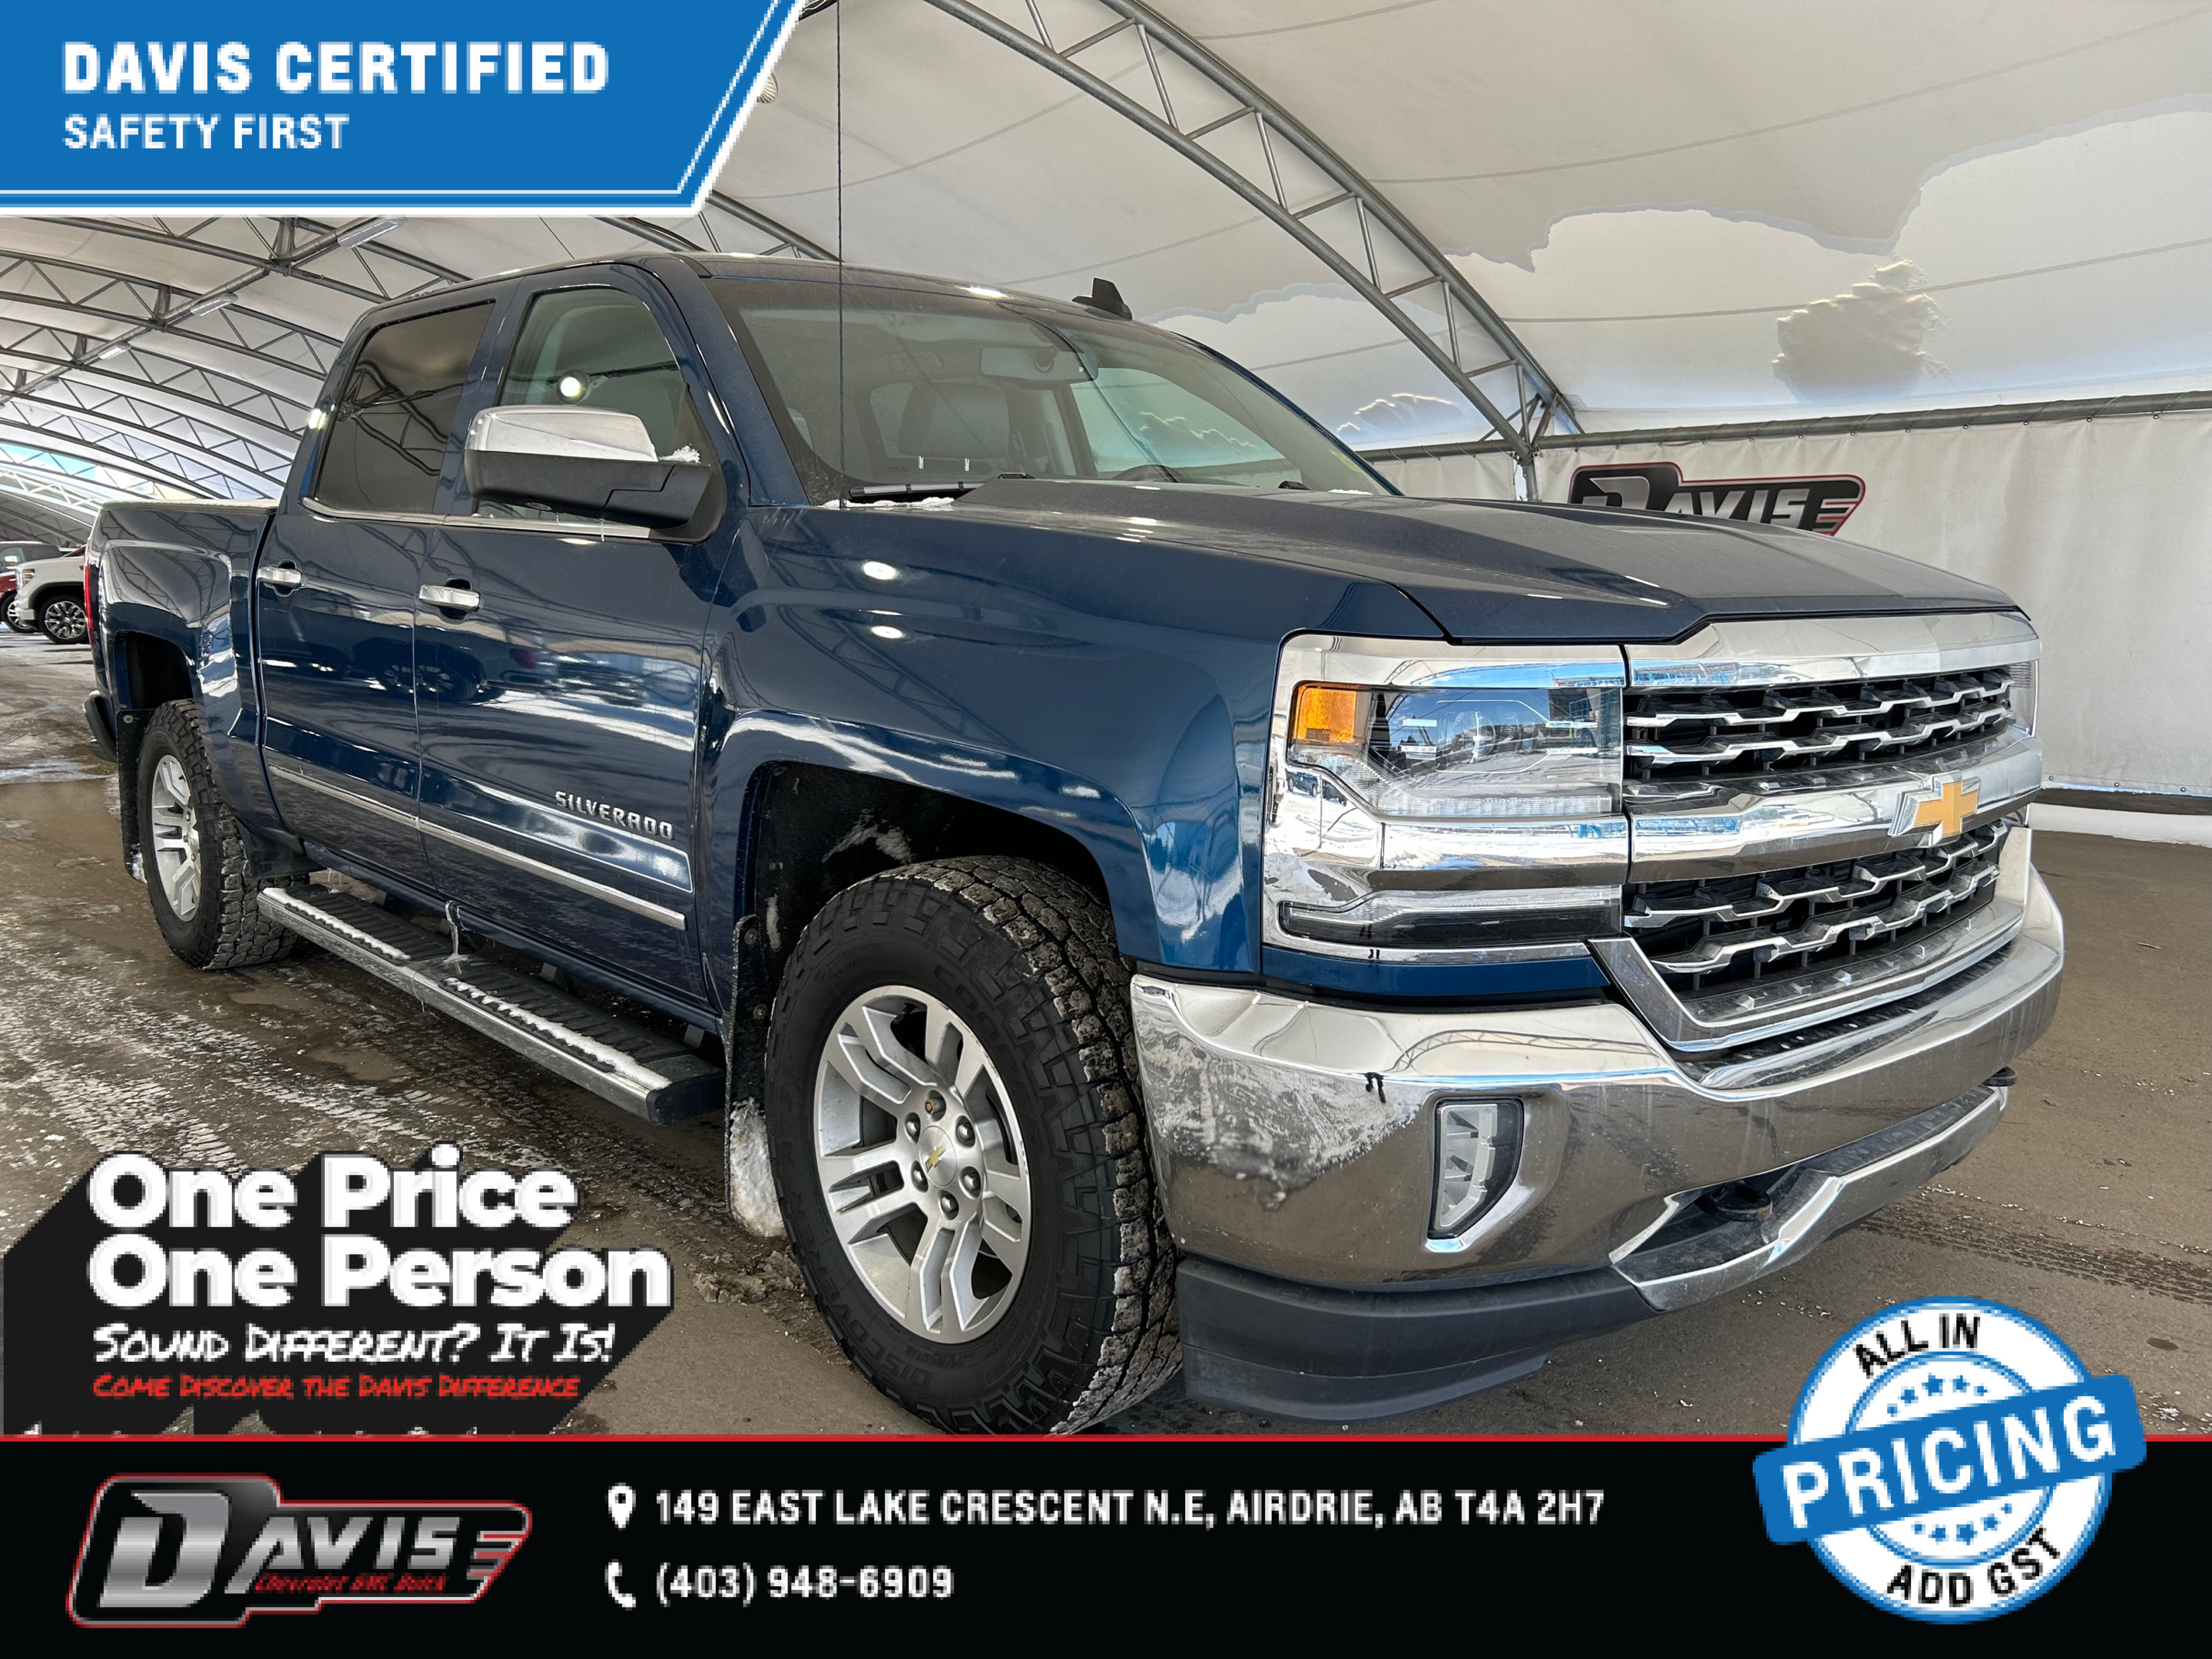 2017 Chevrolet Silverado 1500 1LZ POWERFUL 5.3 V8 WITH TOW PACKAGE, WELL-EQUIPPE